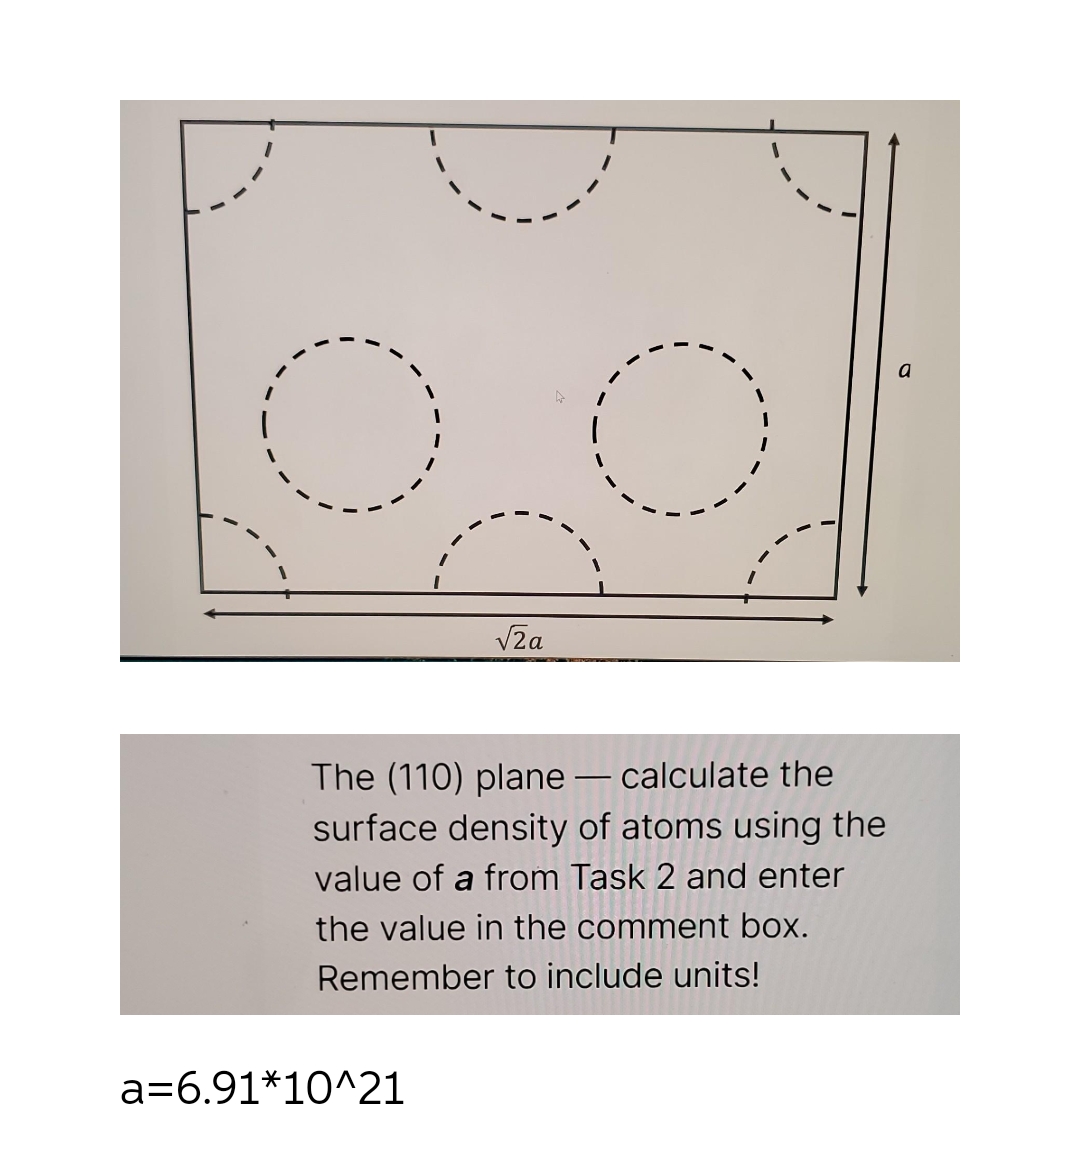 √2a
a=6.91*10^21
O
The (110) plane - calculate the
surface density of atoms using the
value of a from Task 2 and enter
the value in the comment box.
Remember to include units!
a